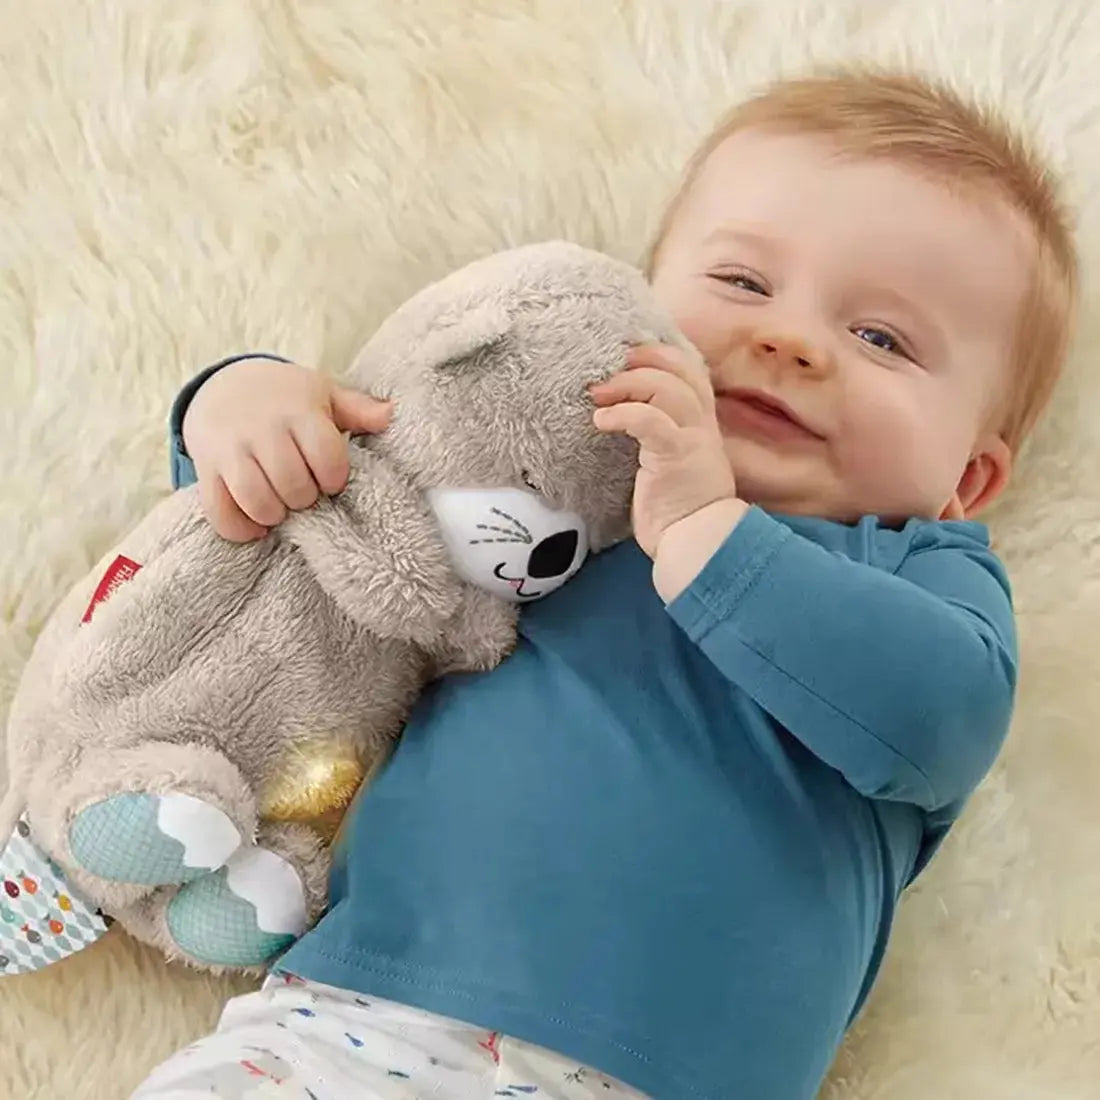 A smiling baby lying on a soft blanket, hugging a plush Soulful Trading Sleep Buddy bunny toy.